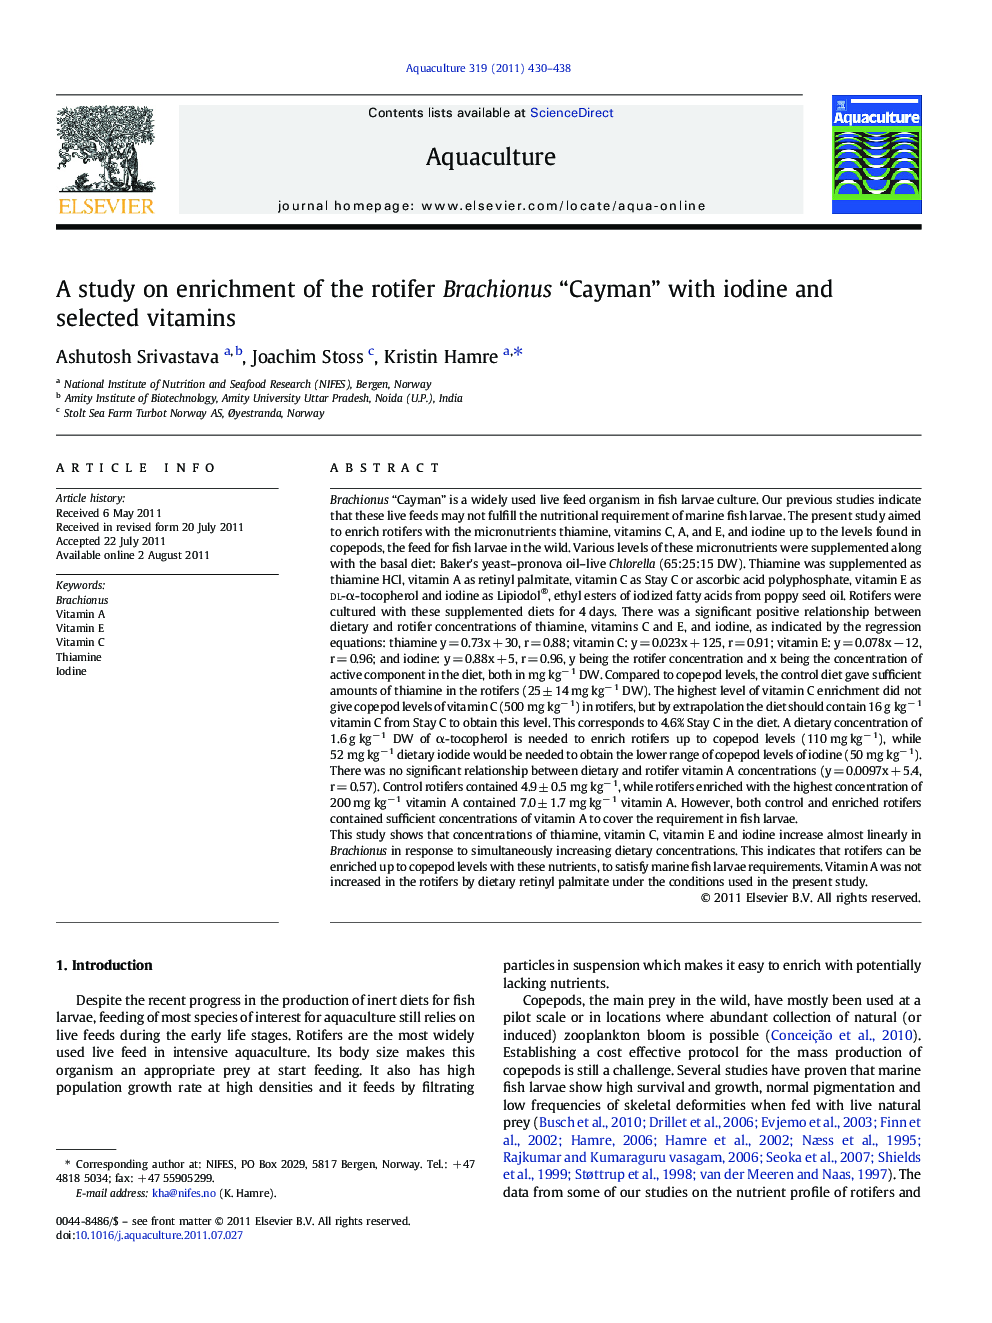 A study on enrichment of the rotifer Brachionus “Cayman” with iodine and selected vitamins